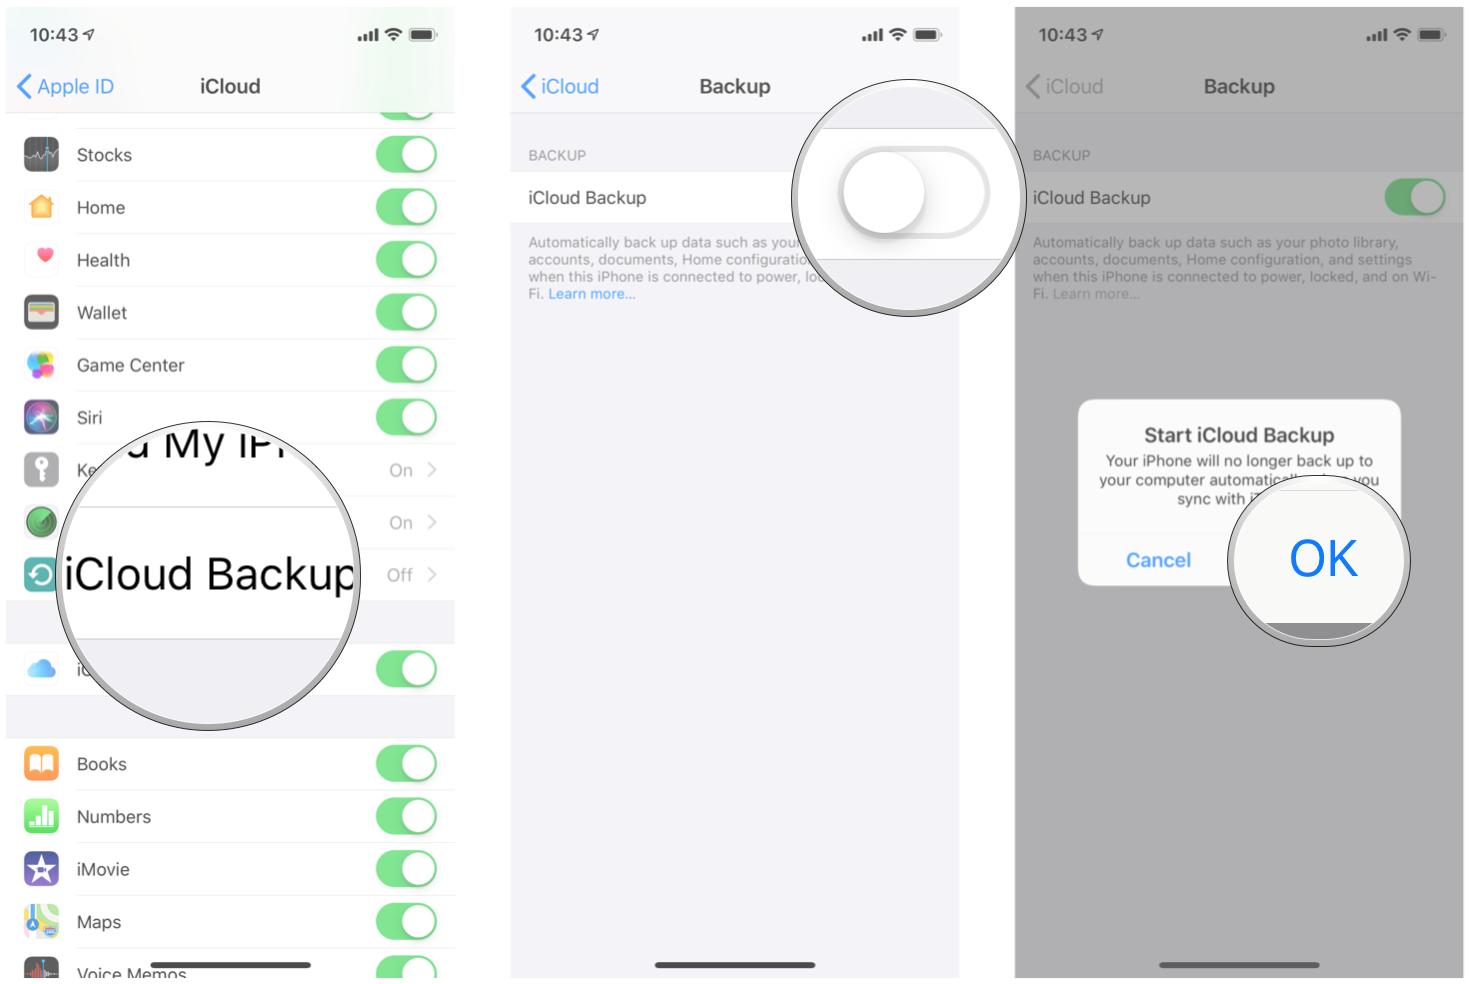 Enabling iCloud backup showing how to tap iCloud Backup, flip the switch to enable backups, and tap OK